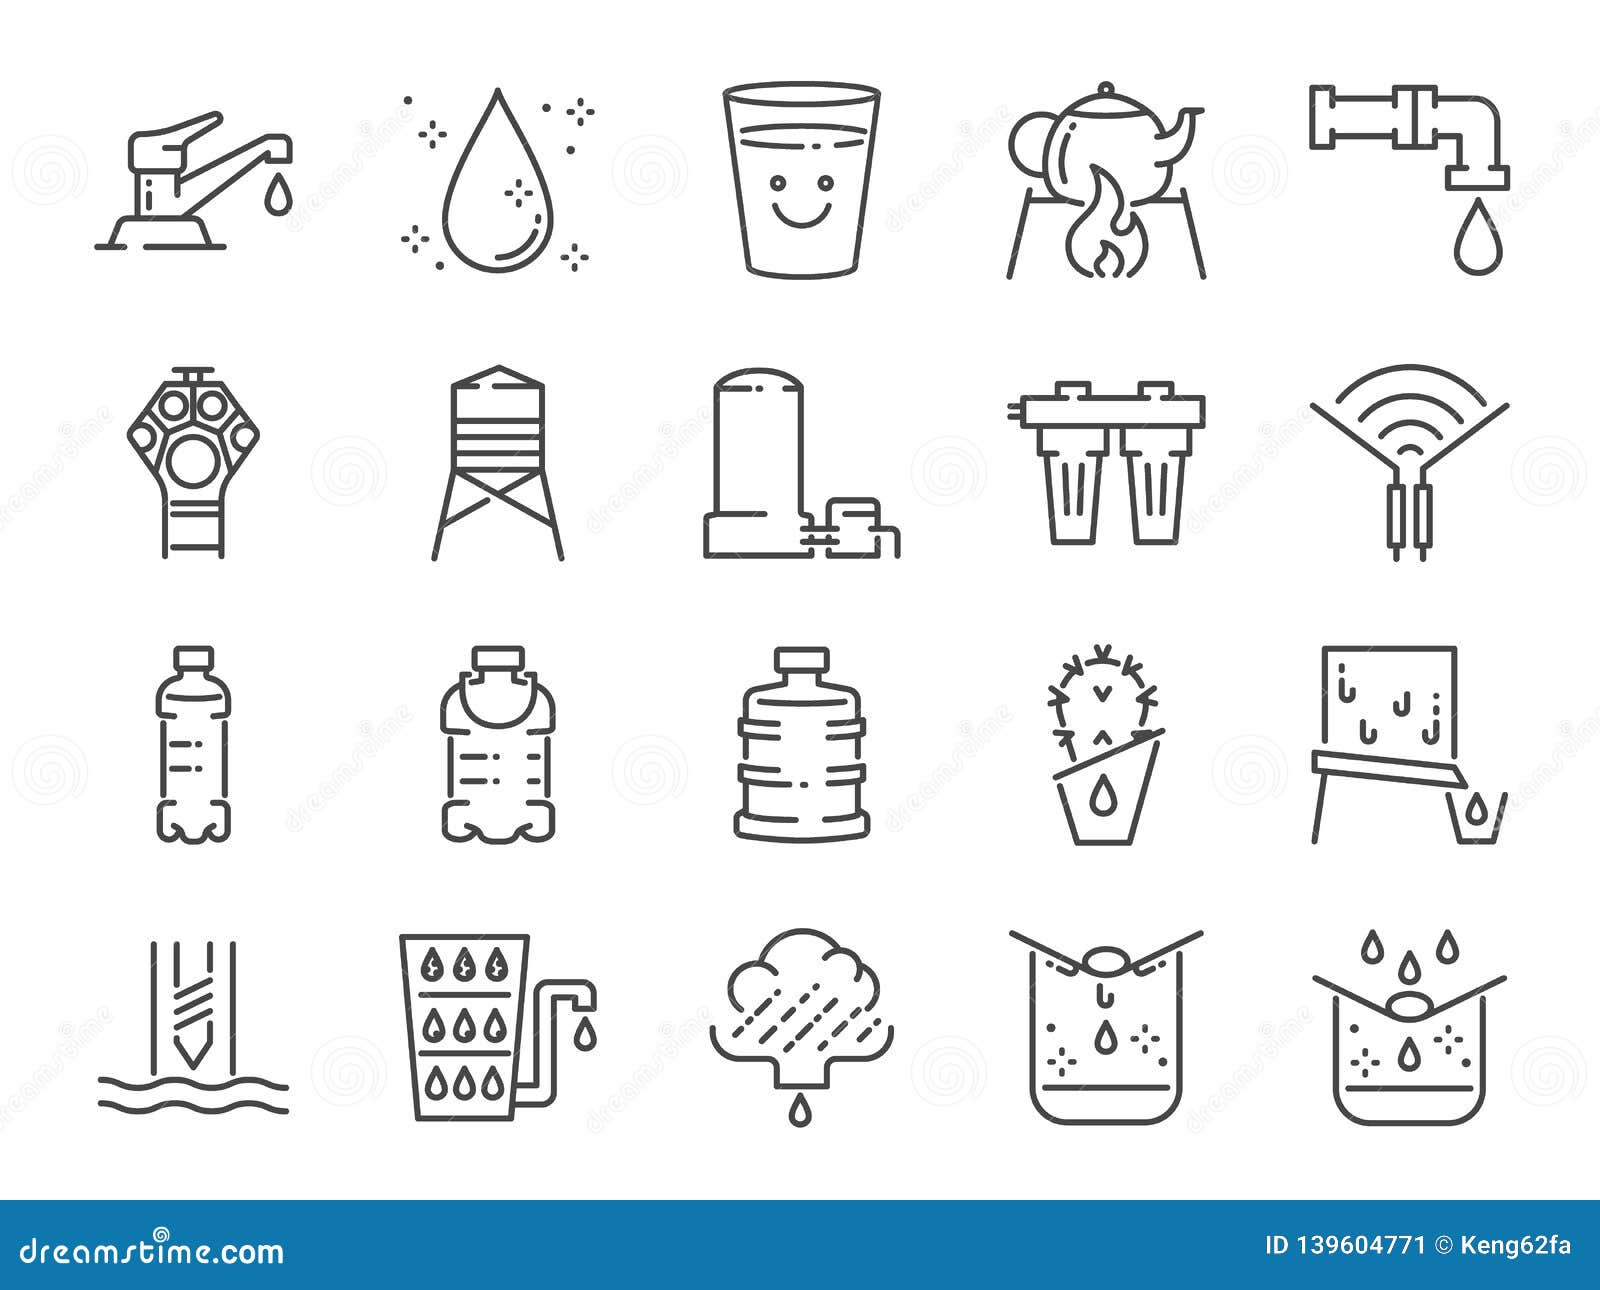 clean water line icon set. included icons as drink, drinkable, filter, purifiers, moisture and more.